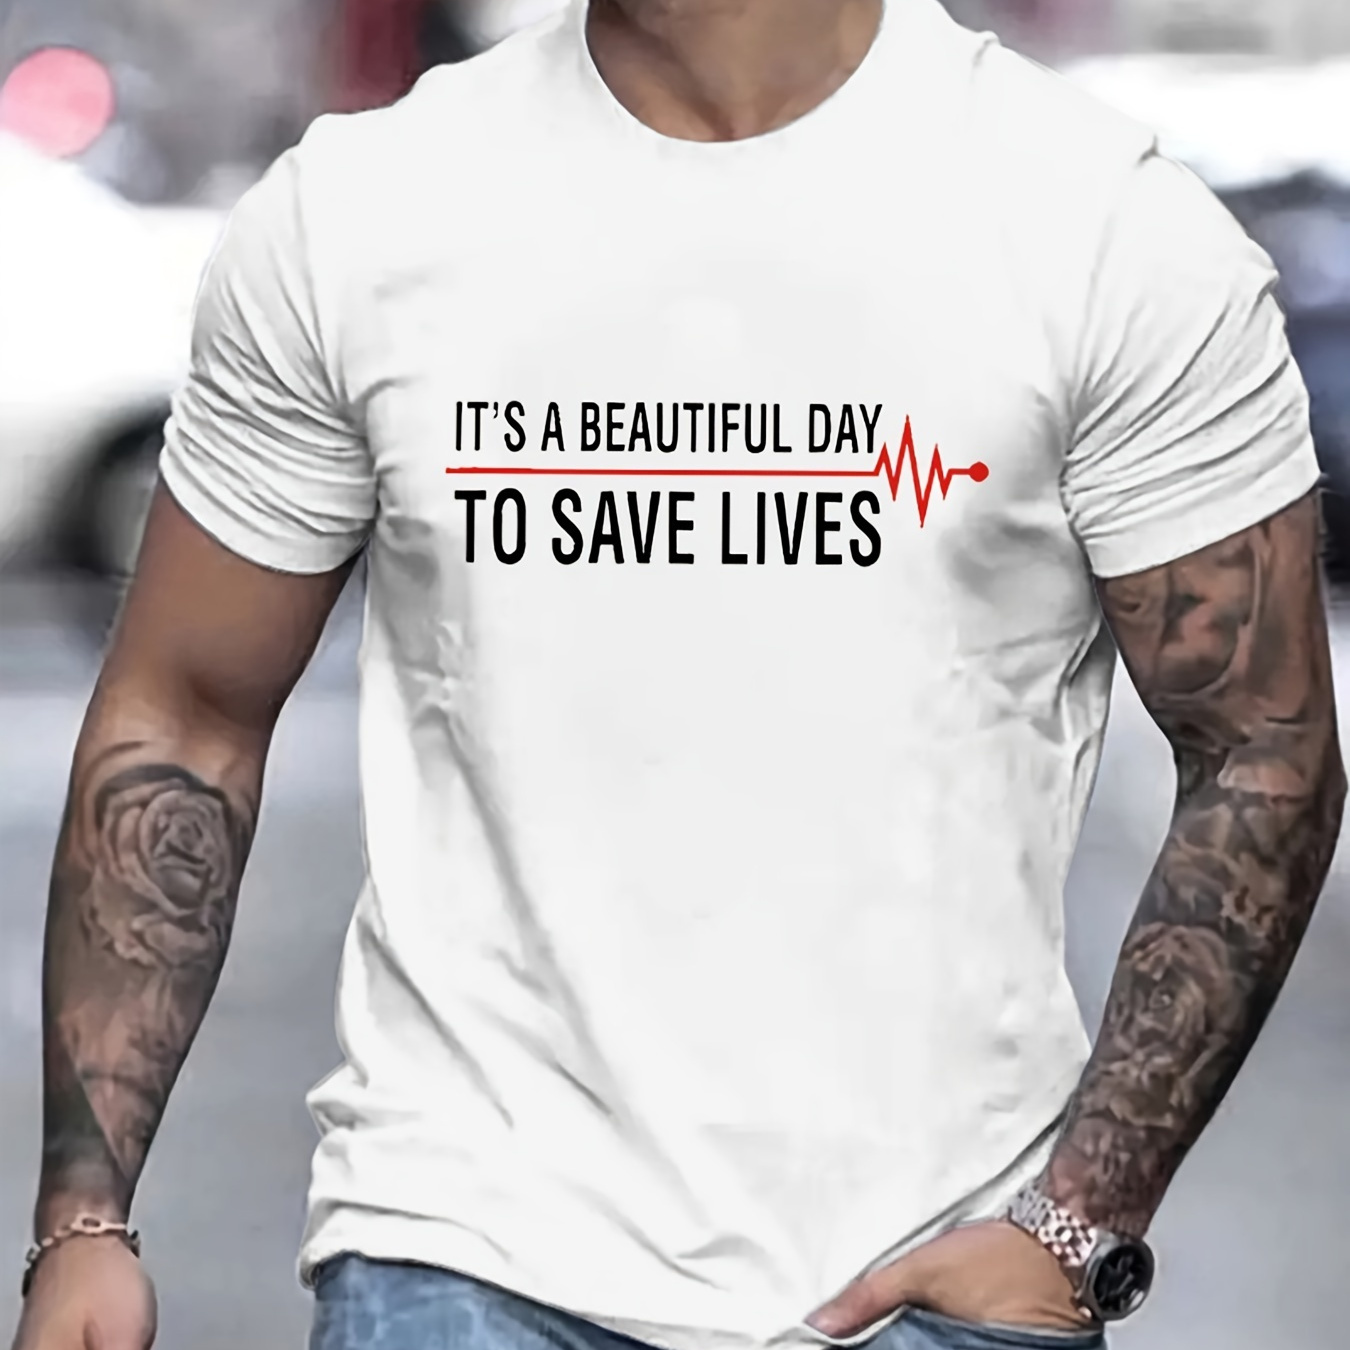 

It's A Beautiful Day To Save Lives Print T Shirt, Tees For Men, Casual Short Sleeve T-shirt For Summer